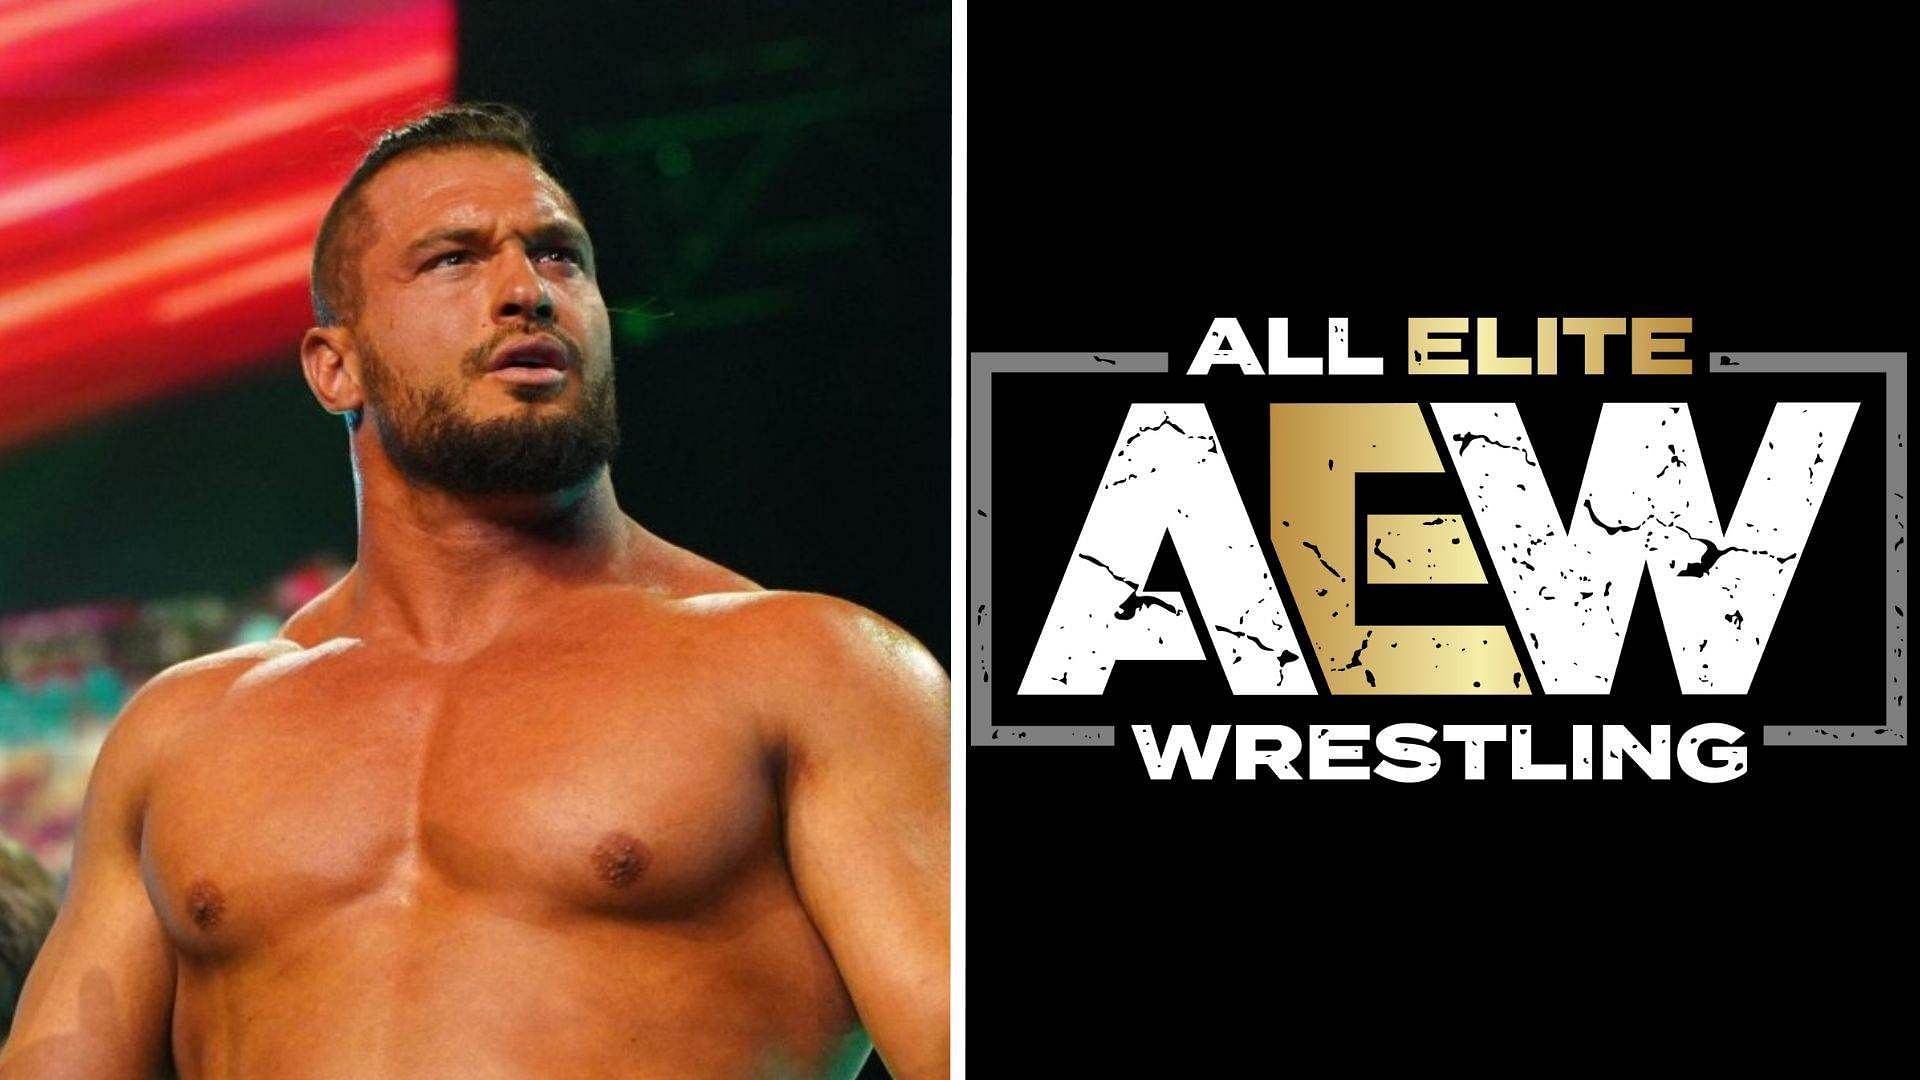 Wardlow is a former two-time TNT Champion in AEW